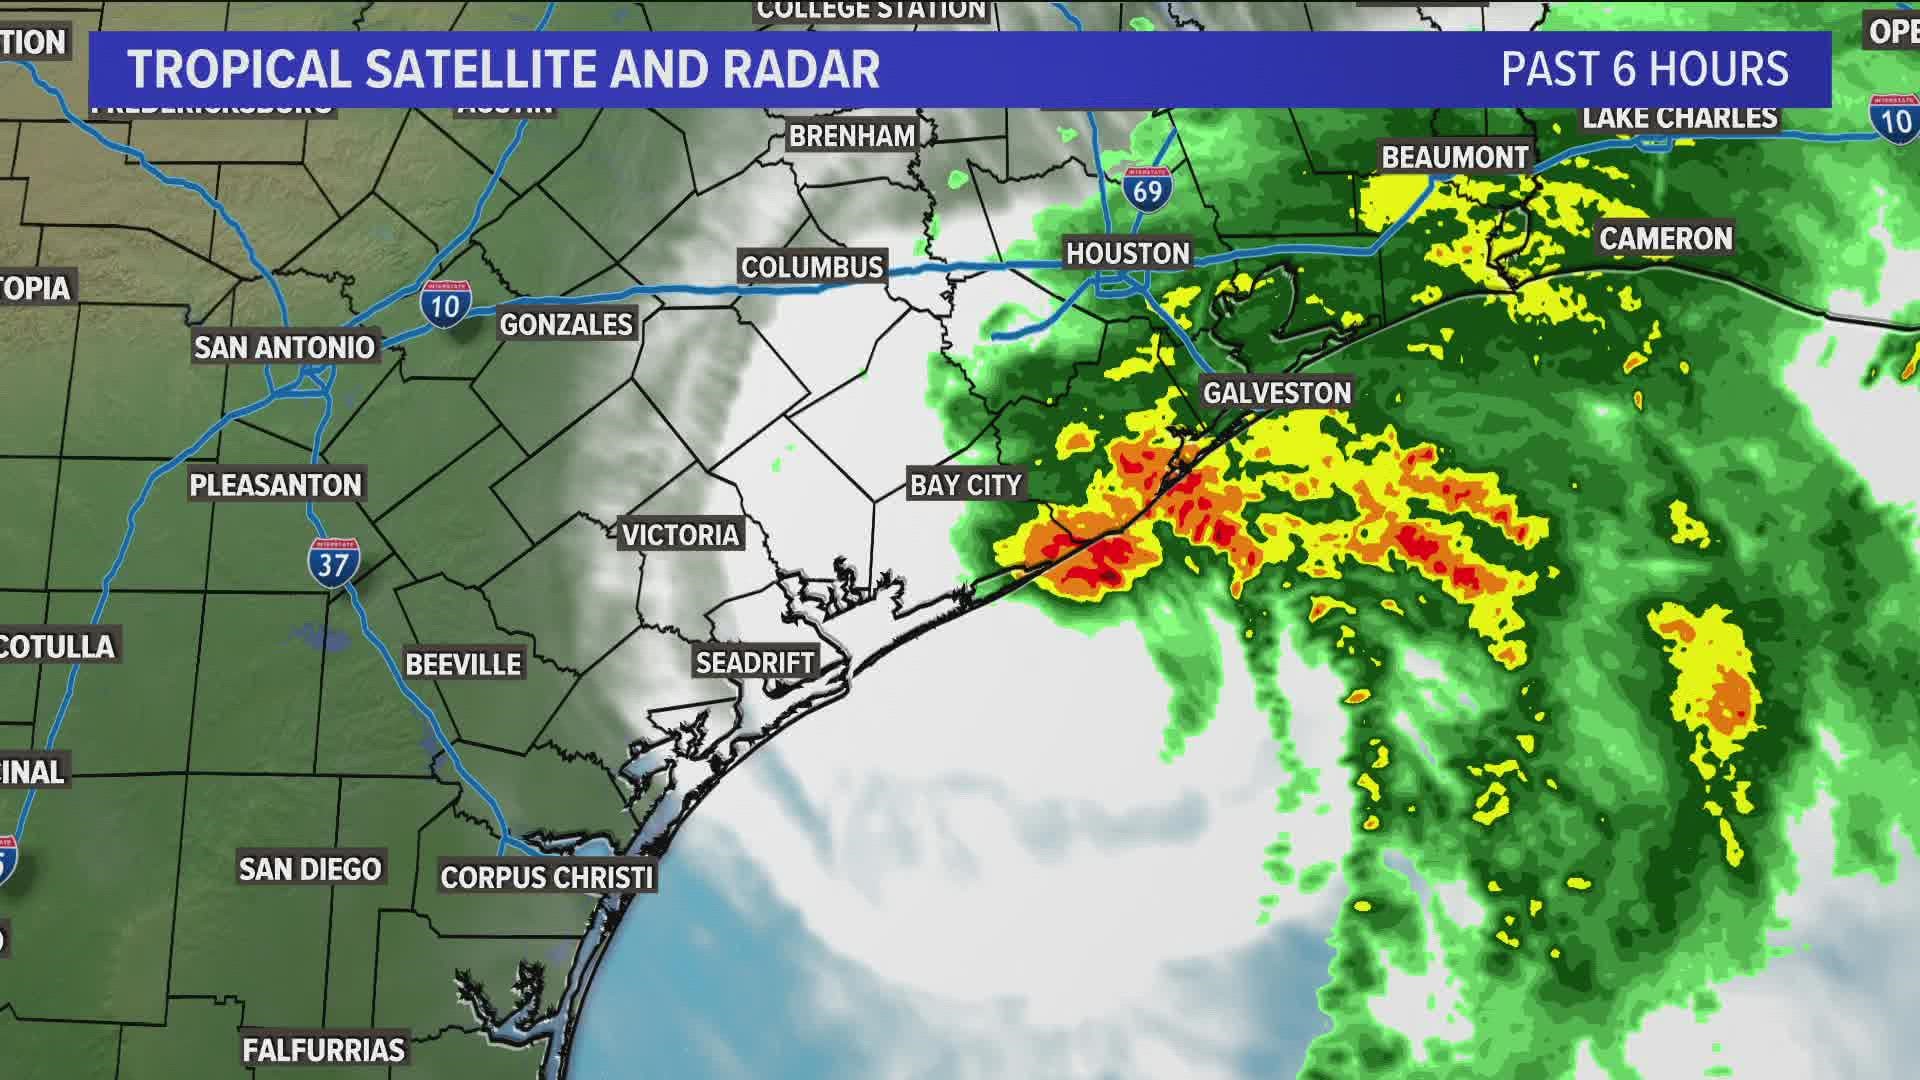 The storm has been skirting the Texas coastline all night long and is expected to make landfall late Monday night or early Tuesday morning.